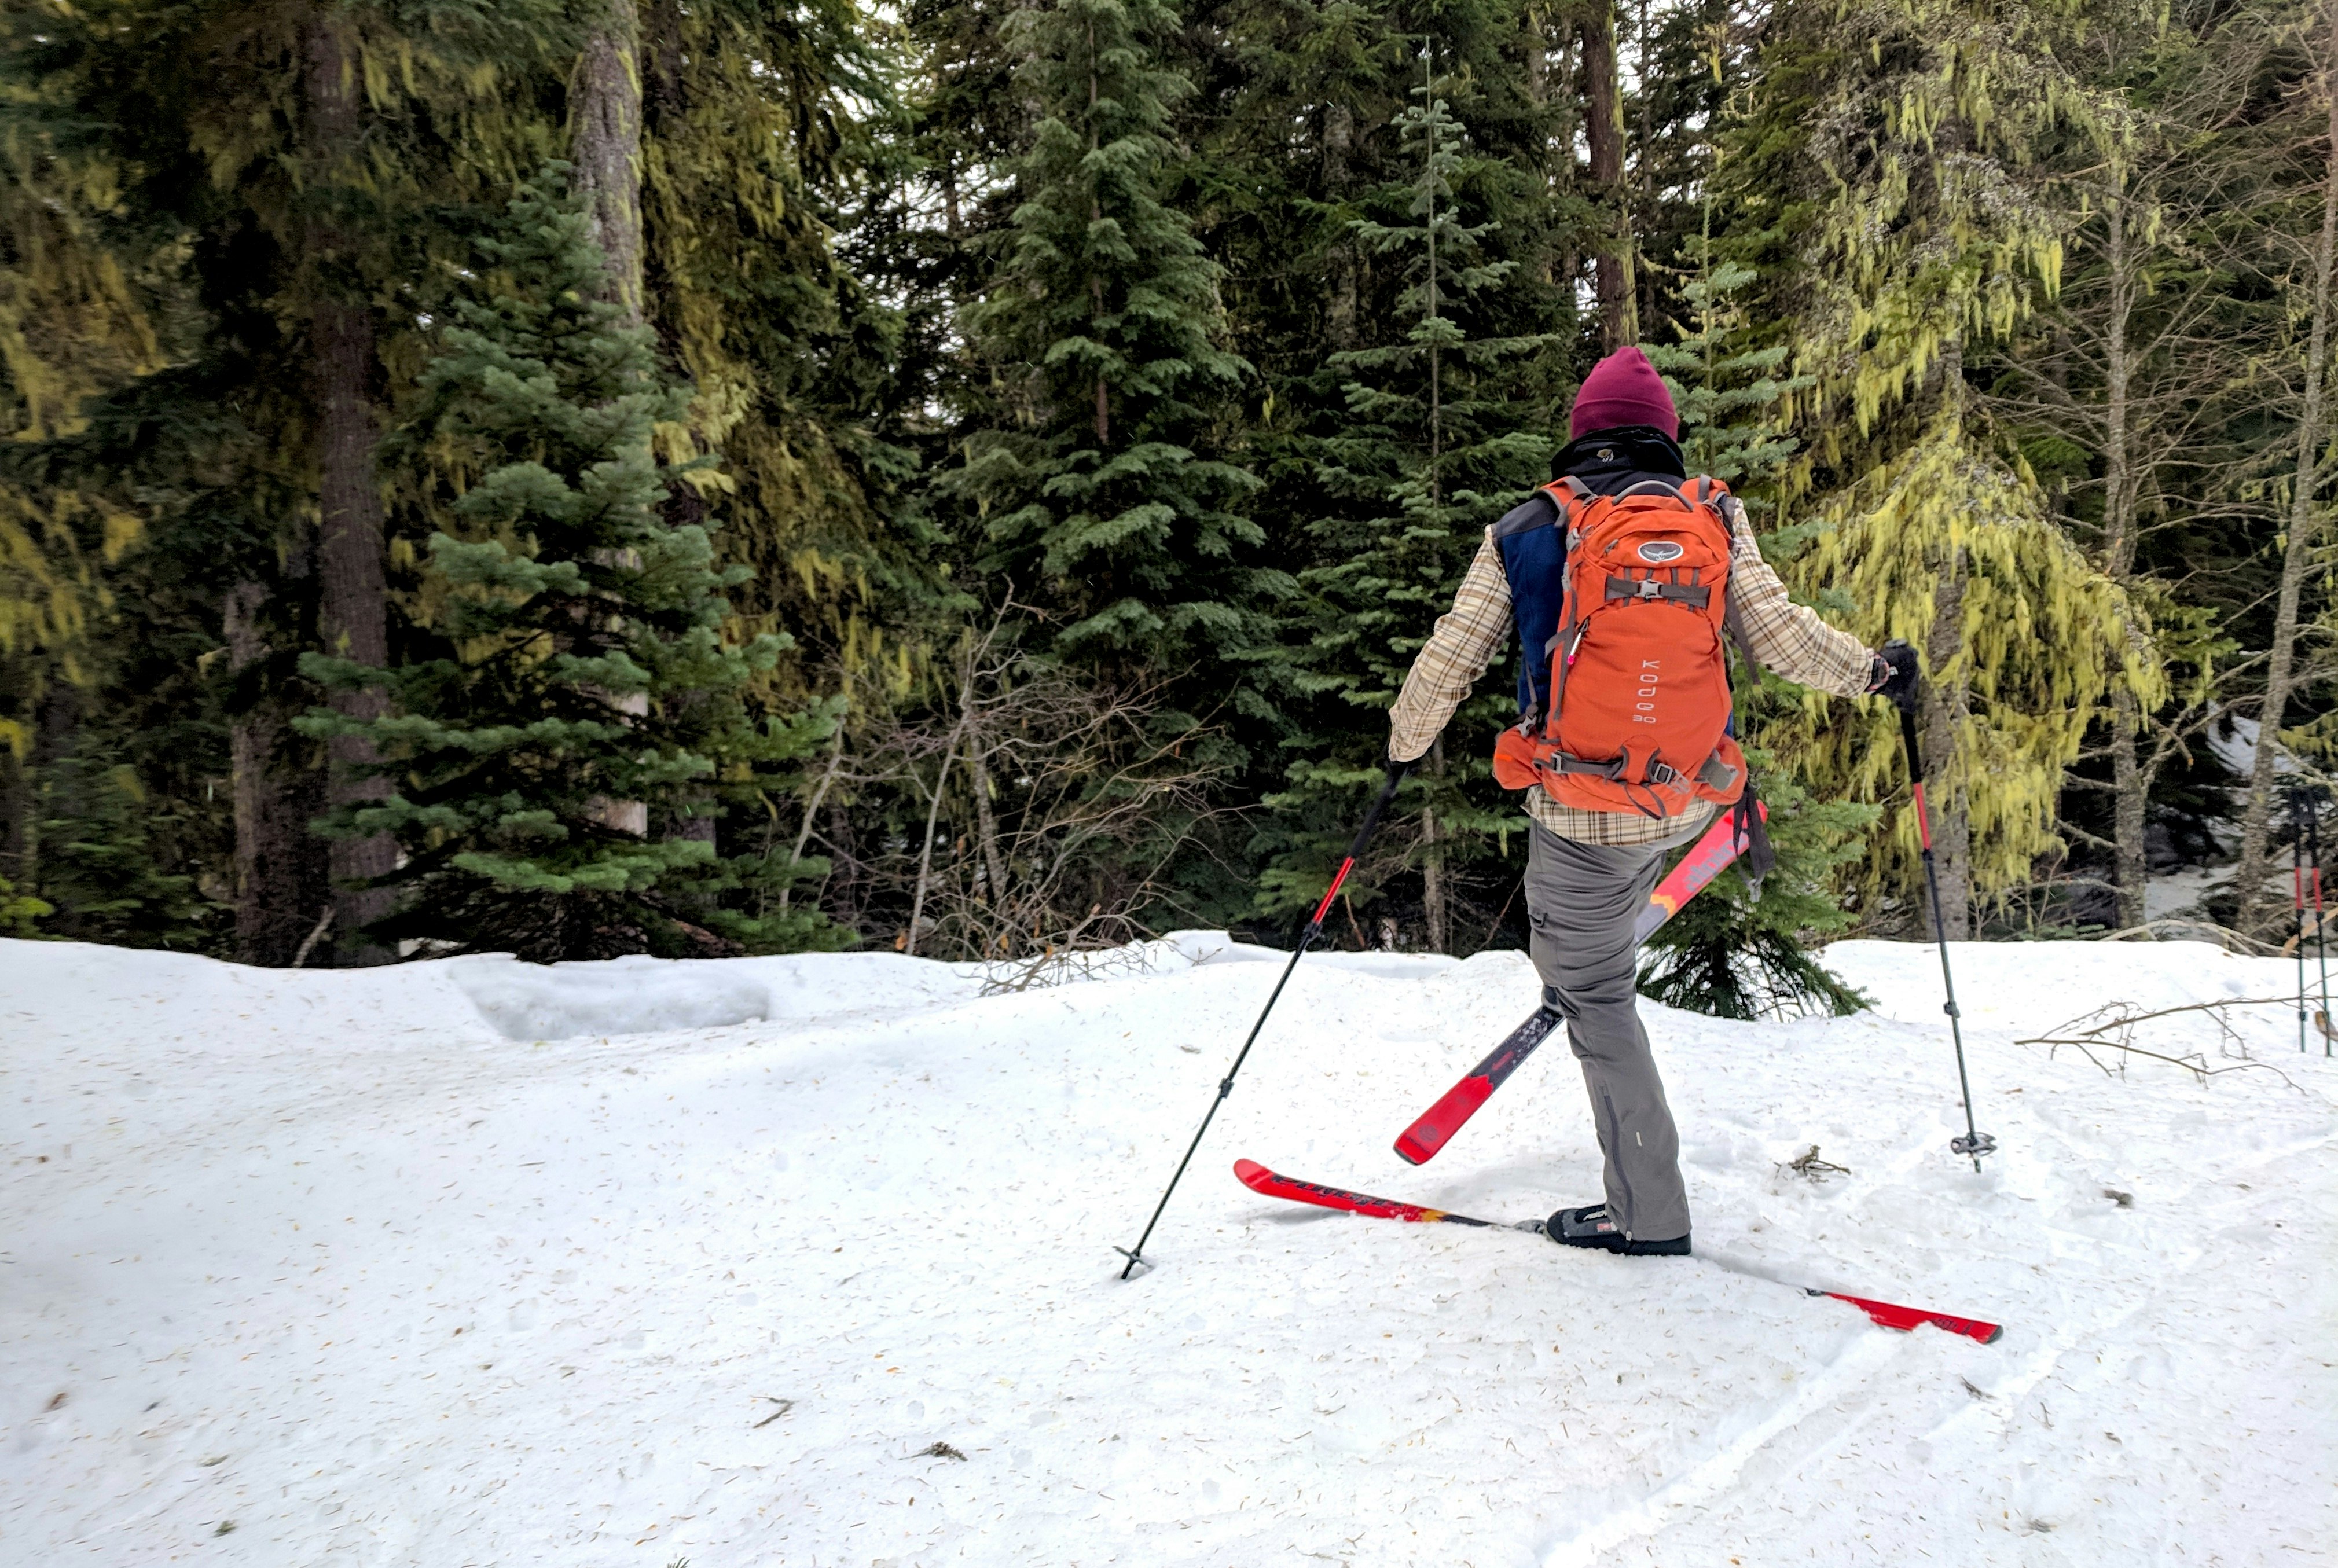 A man shakes snow off one of his cross-country skis in a snowy forest in Oregon. He is wearing bright orange backpack